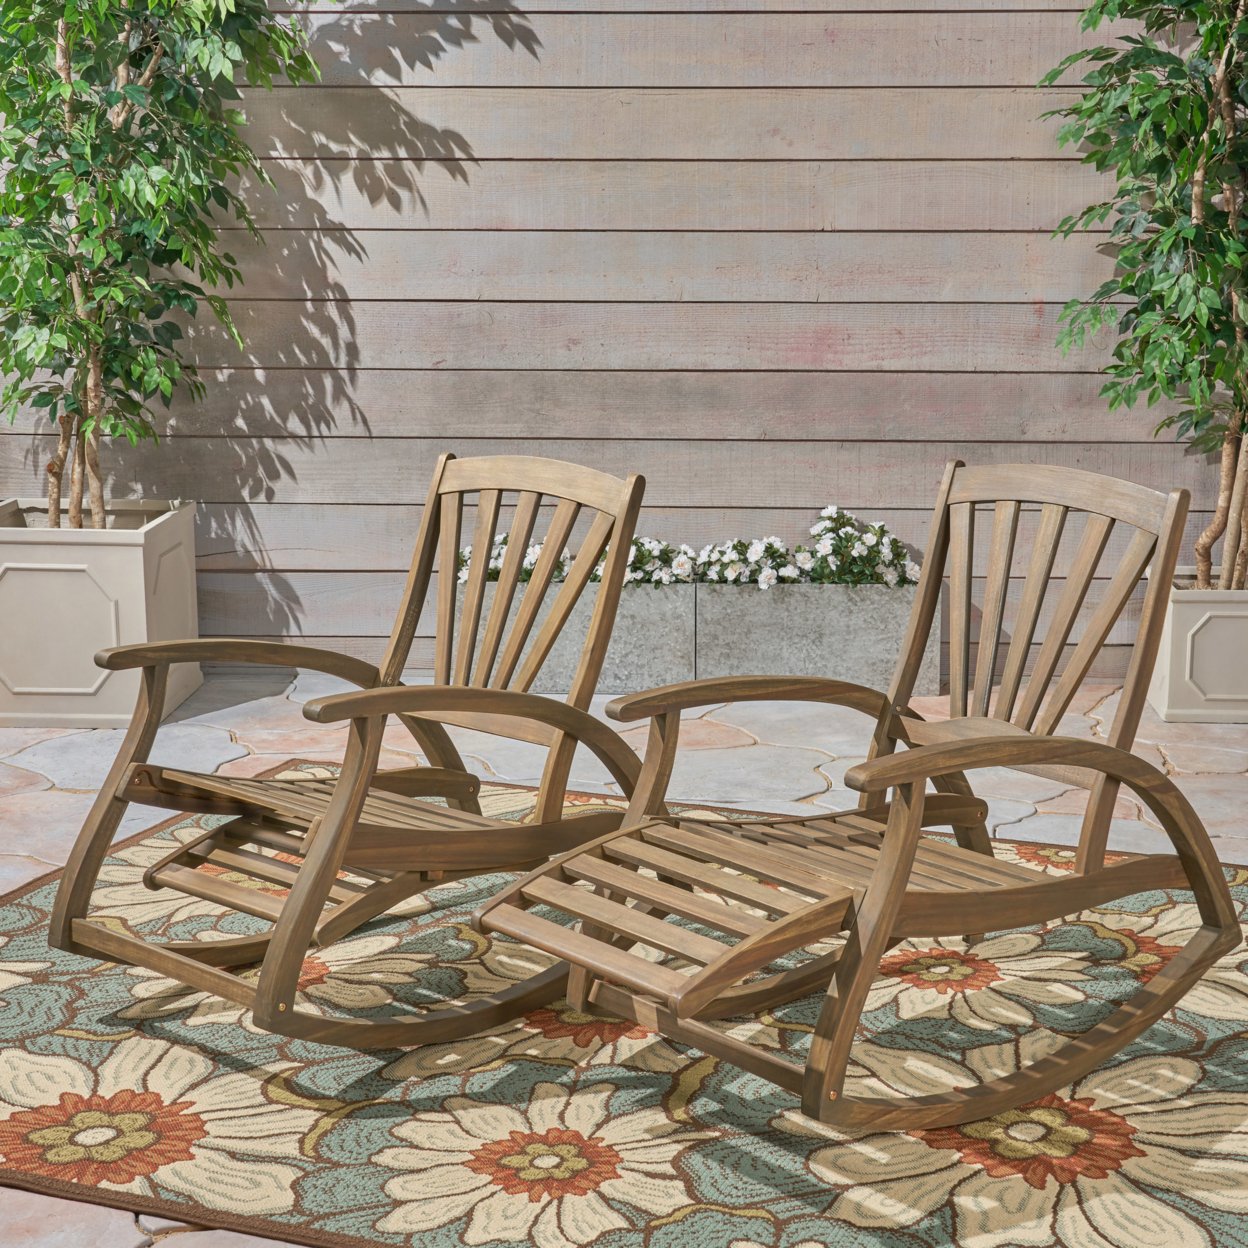 Lee Outdoor Rustic Acacia Wood Recliner Rocking Chairs (Set Of 2) - Gray